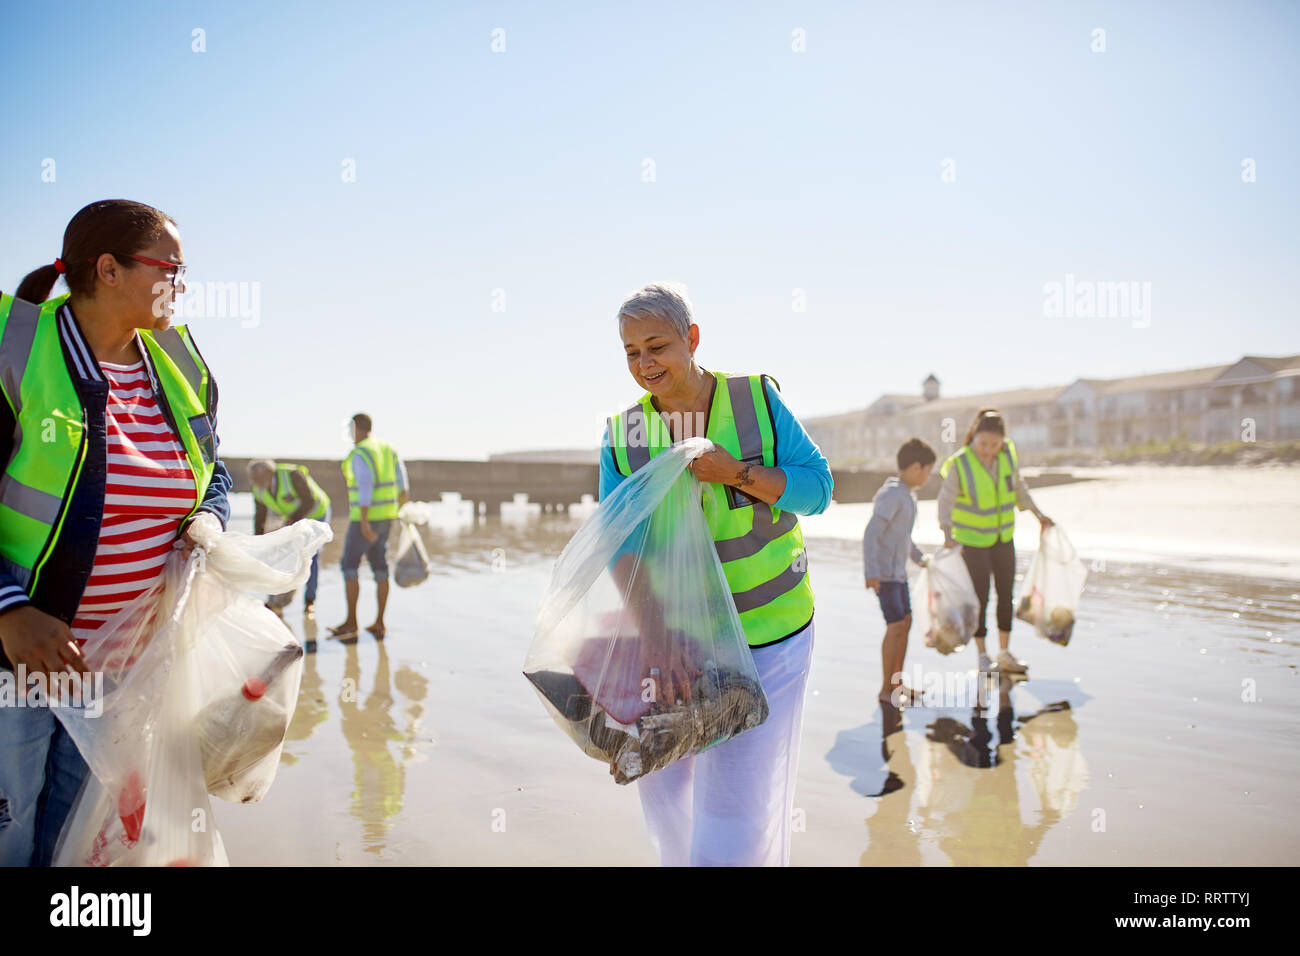 Volunteers cleaning up litter on sunny, wet sand beach Stock Photo